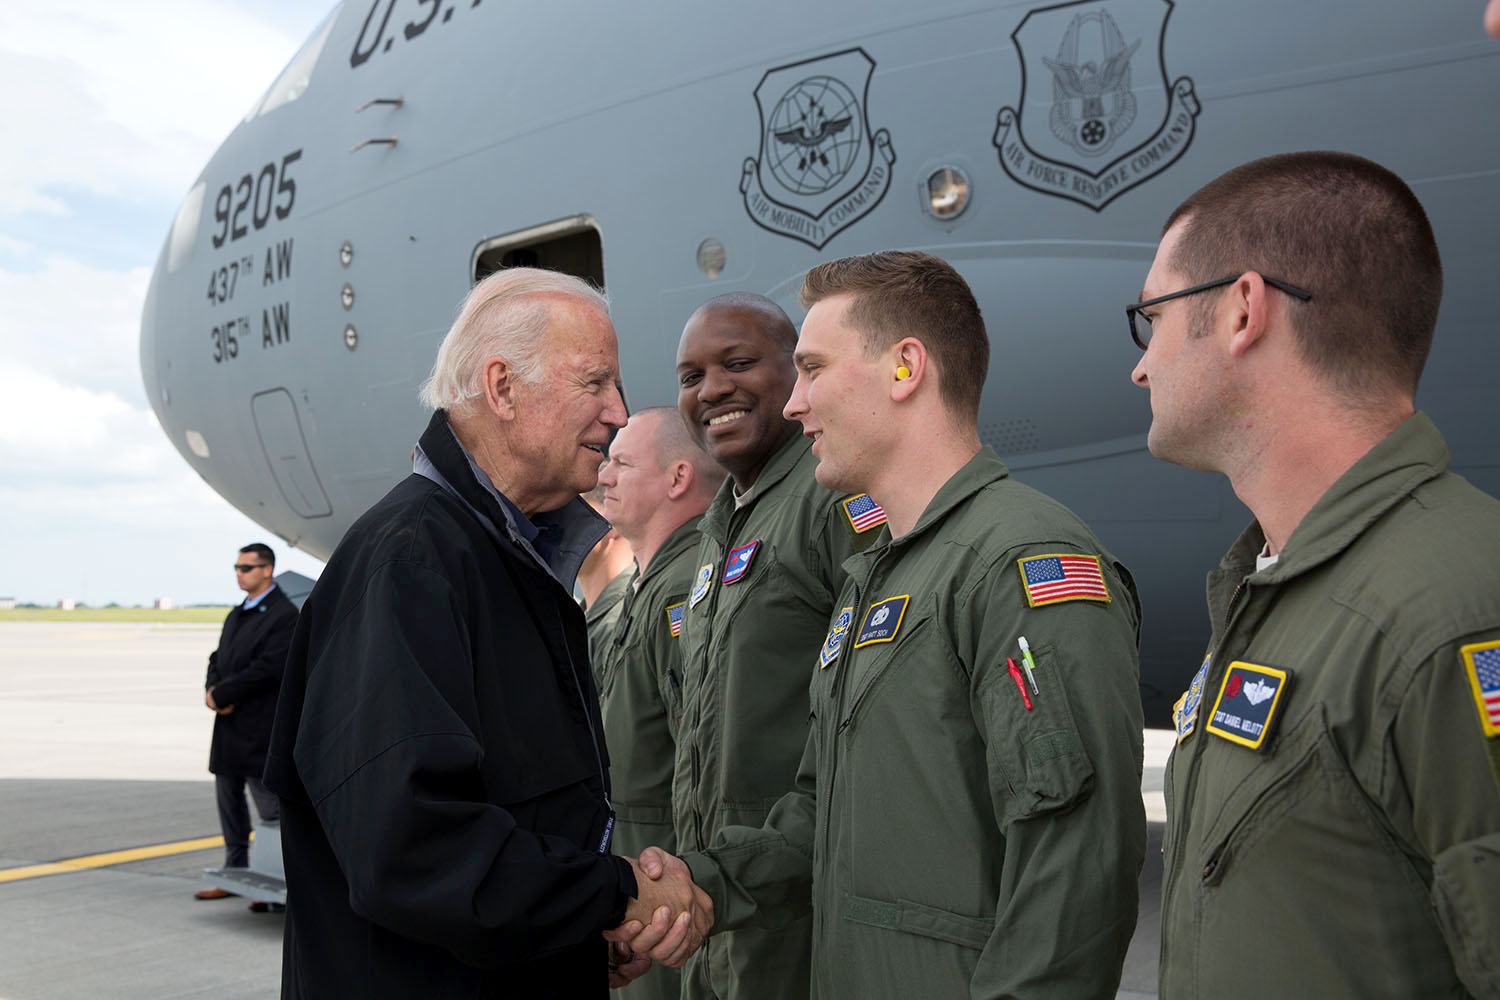 Vice President Joe Biden shakes hands with crew members outside a C-17 serving as Air Force Two, at Dublin International Airport, in Dublin Ireland, June 23, 2016. (Official White House Photo by David Lienemann)